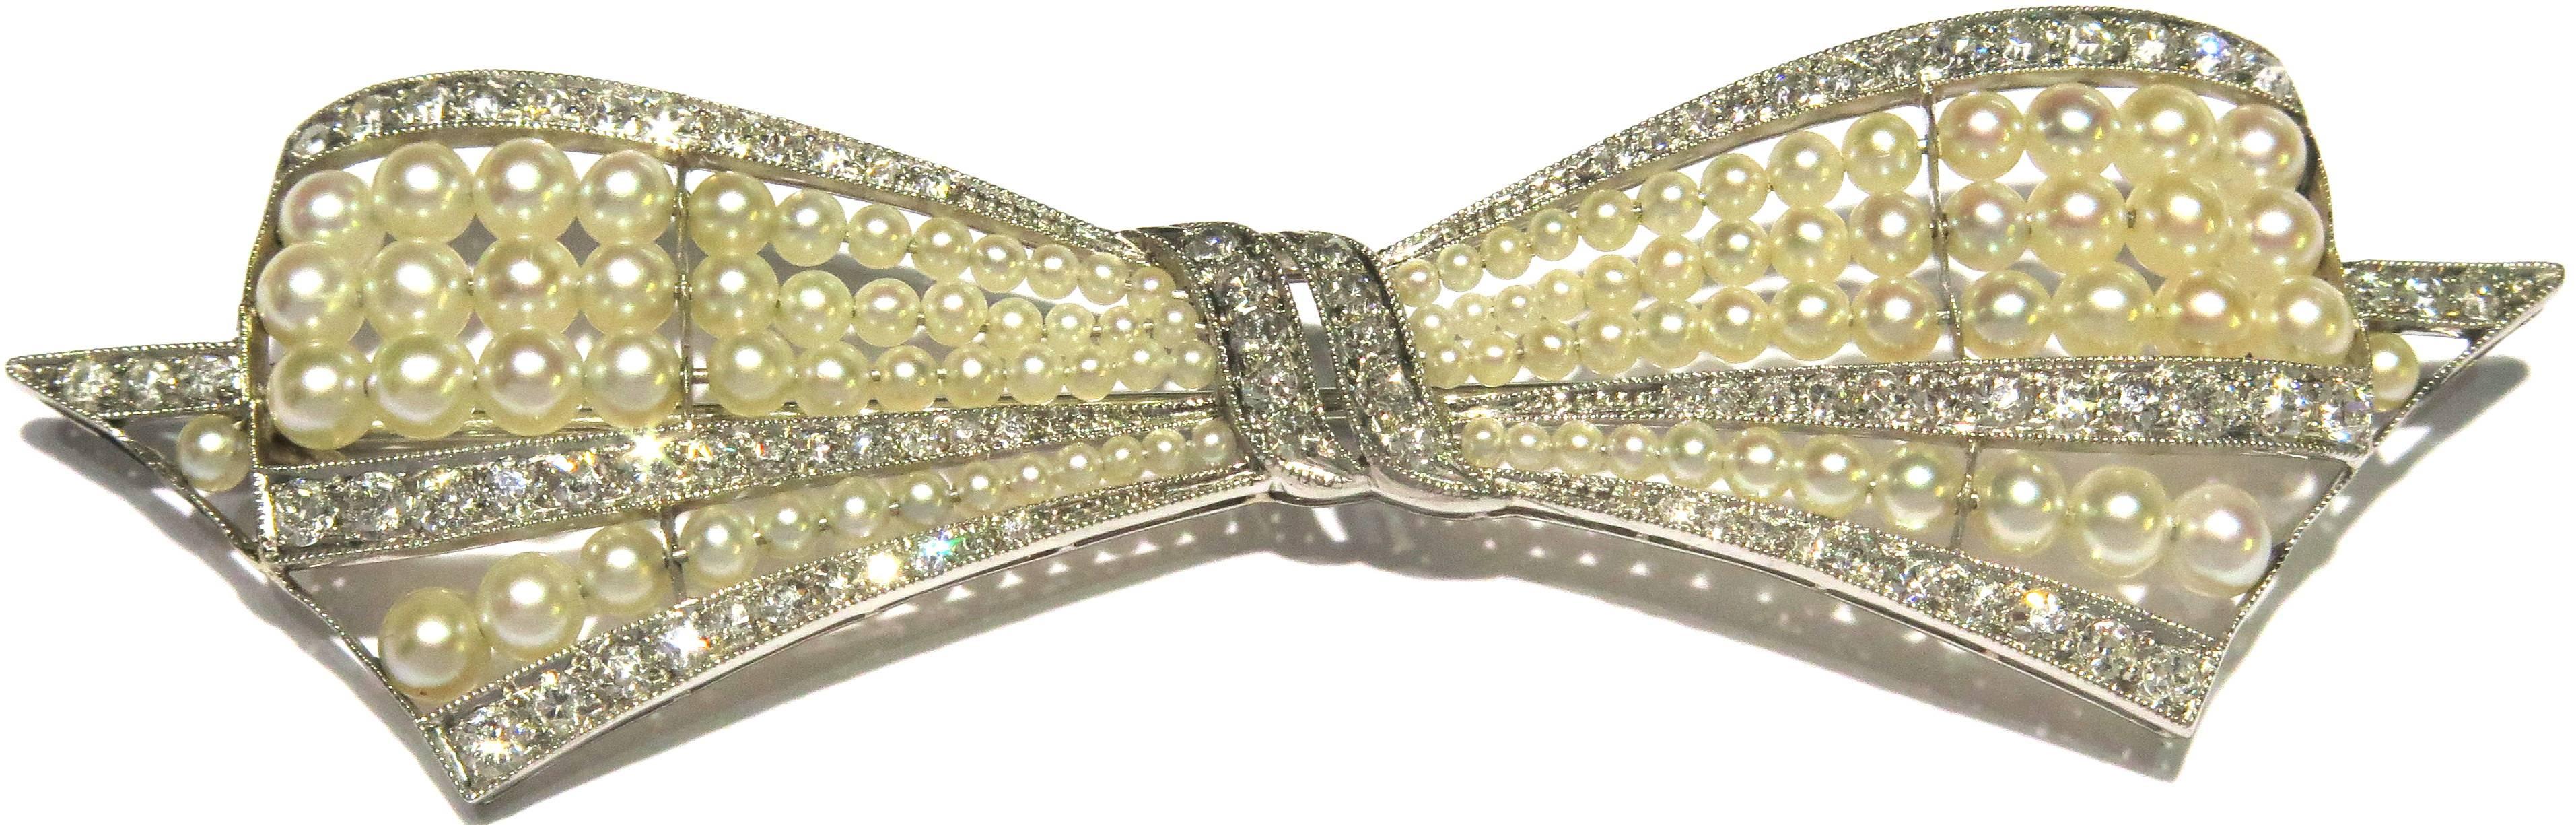 Exquisite Art Deco Natural Pearl Diamond Platinum Bow Pin In Excellent Condition For Sale In Palm Beach, FL